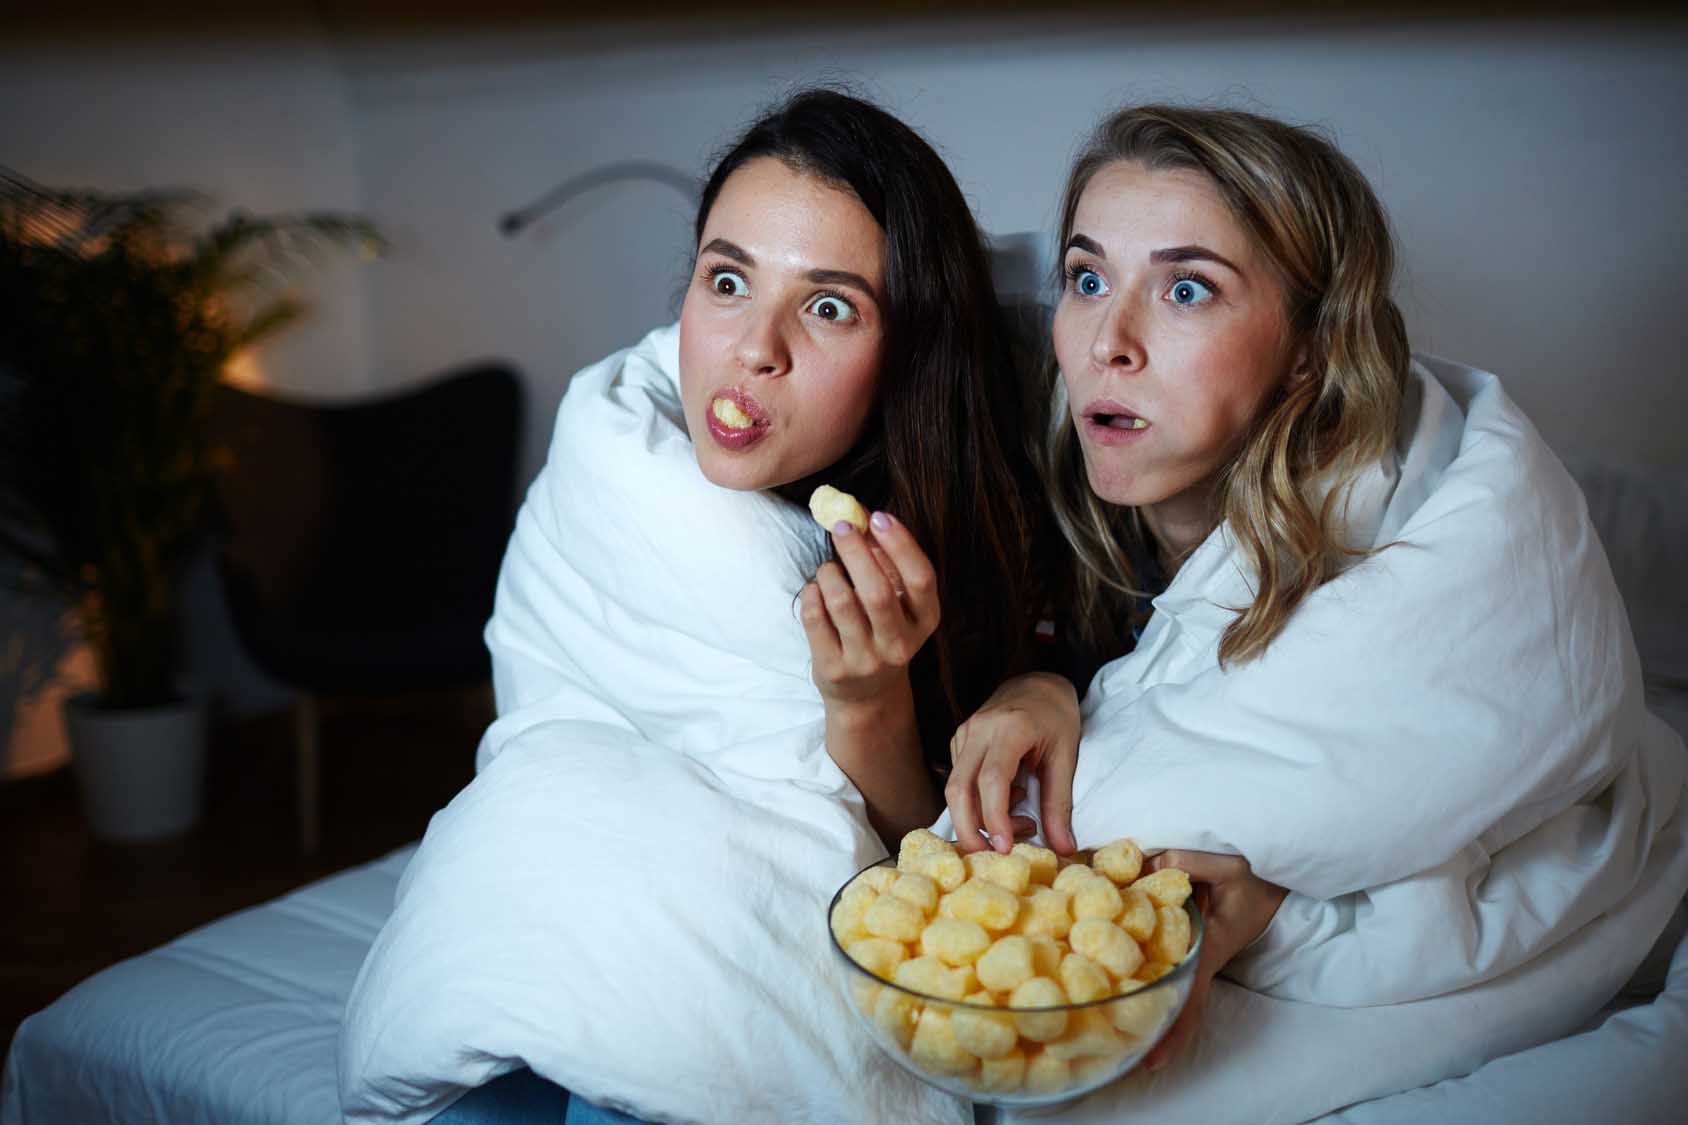 Curious girls eating corn rolls from bowl while watching captivating movie at night